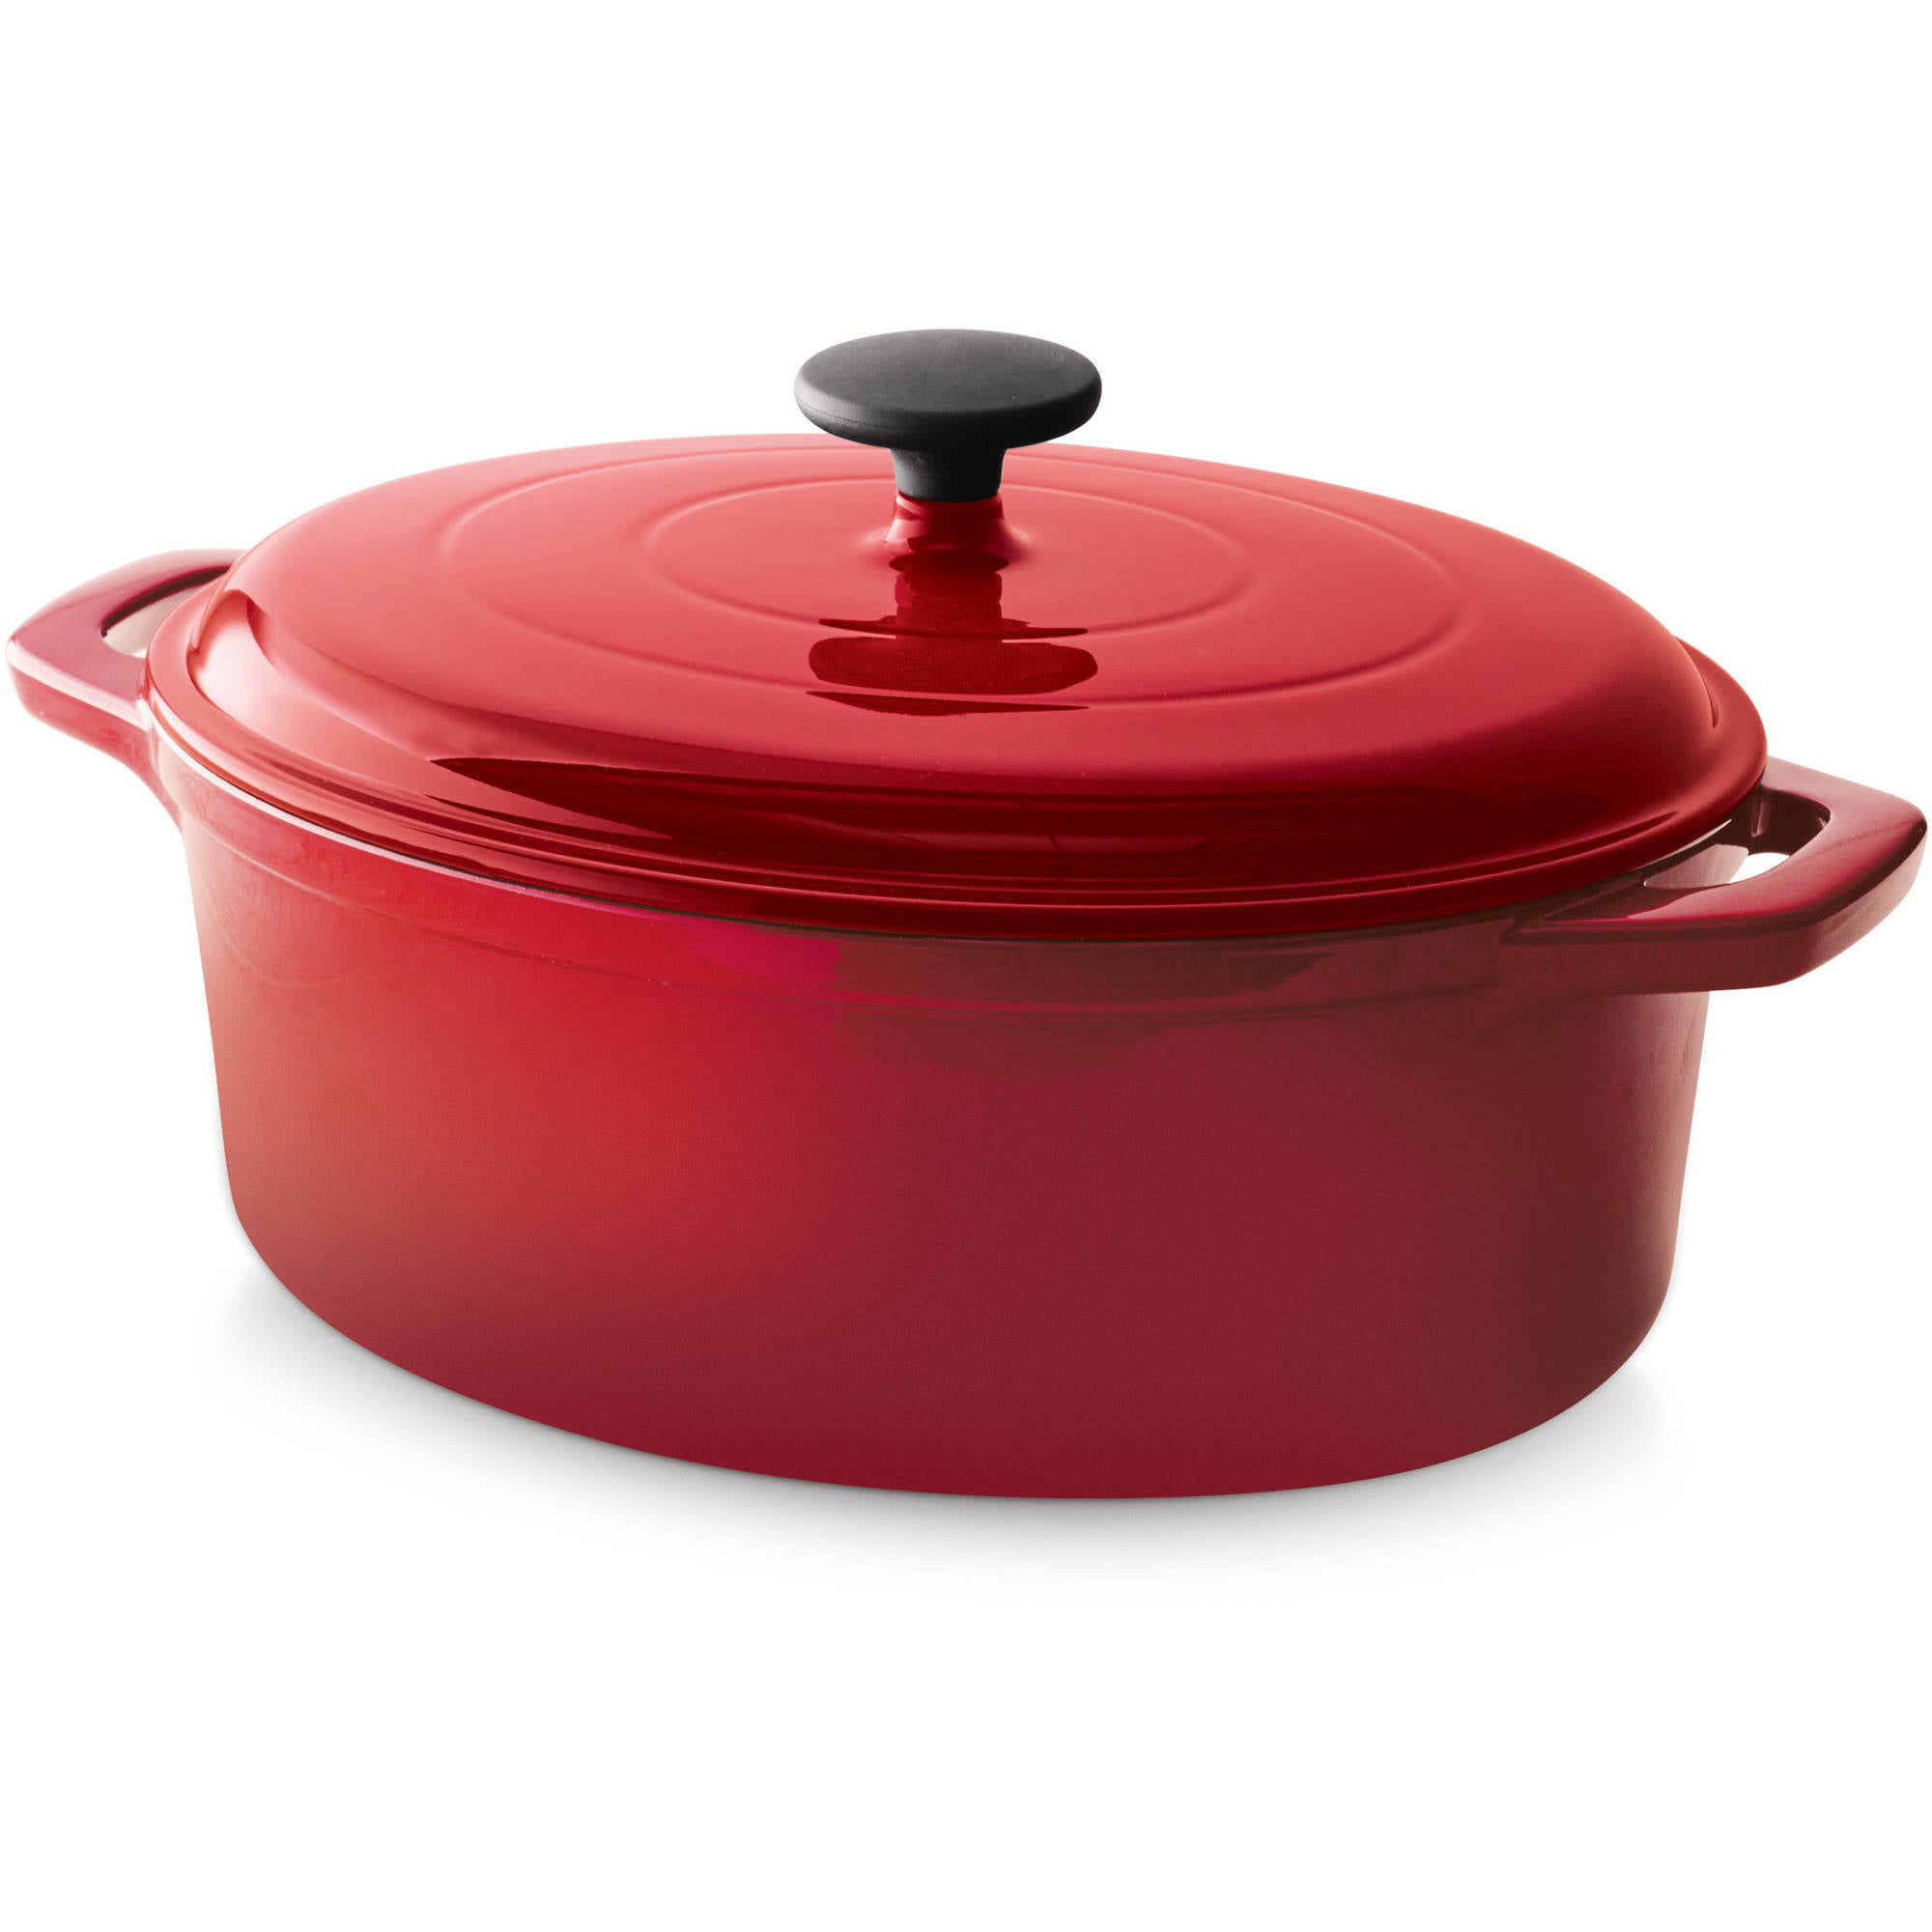 Tramontina Enameled Cast Iron Dutch Oven, 2-pack 